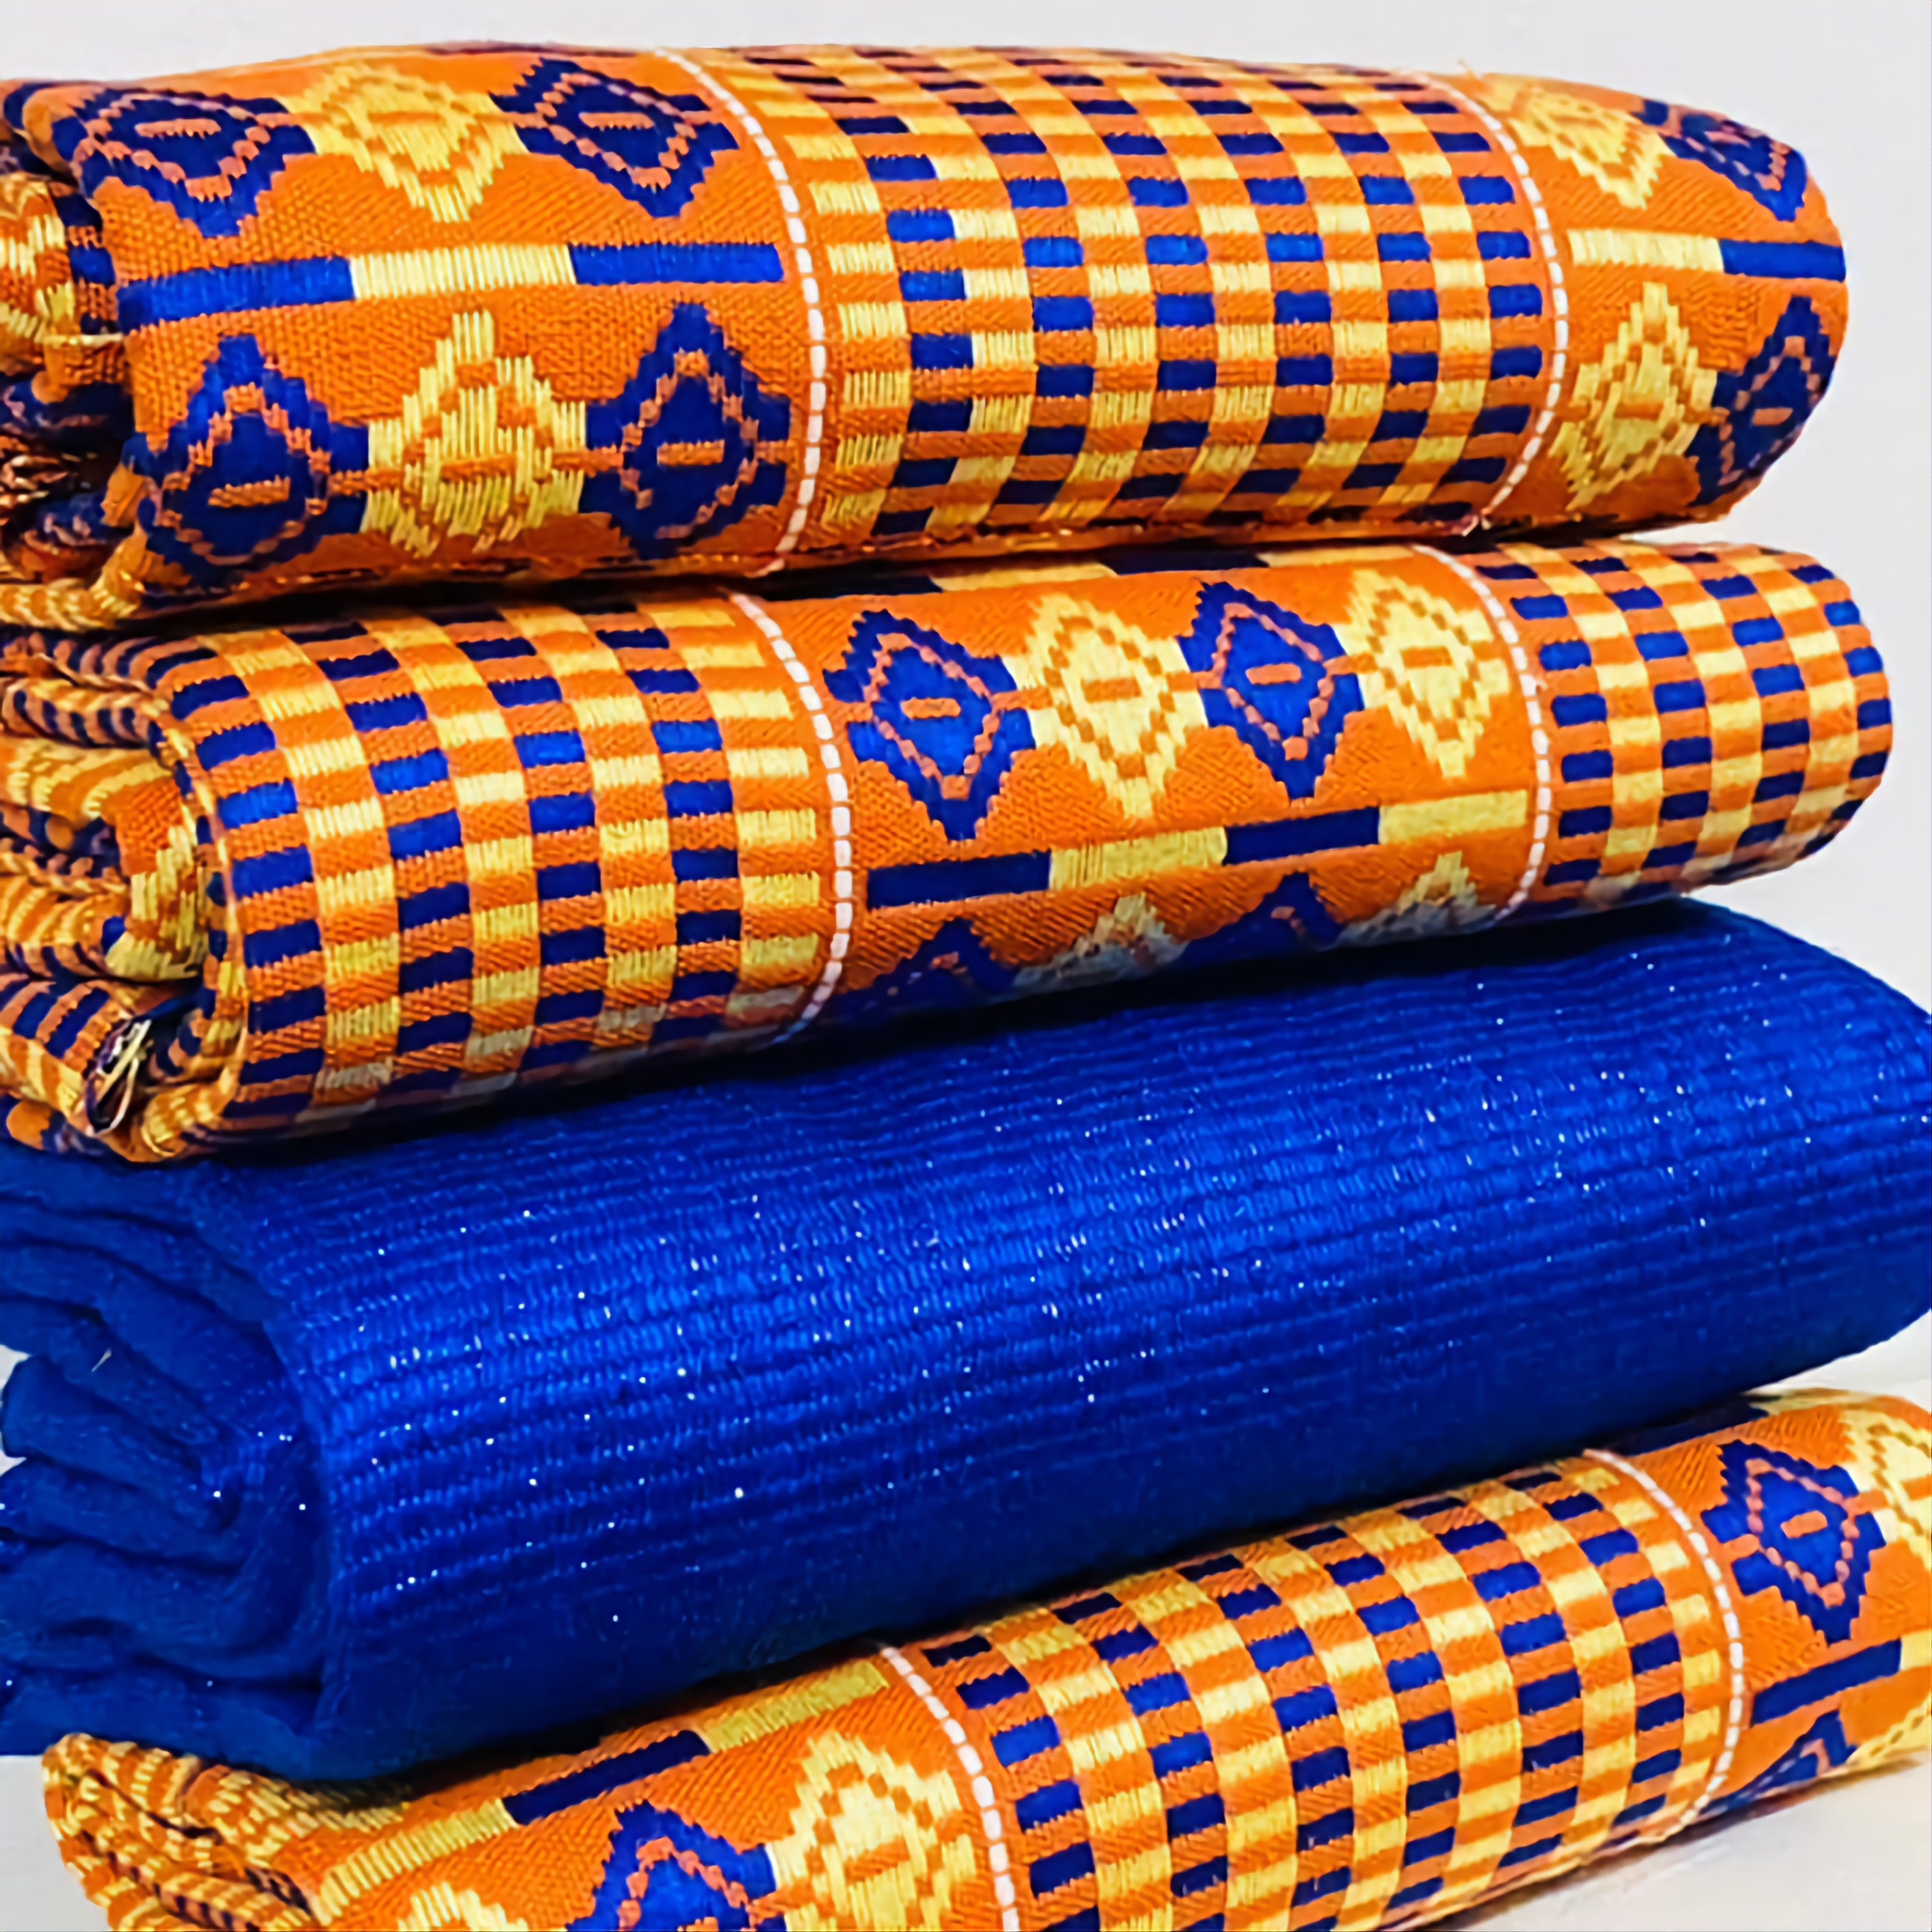 Authentic Hand Weaved Kente Cloth A2380